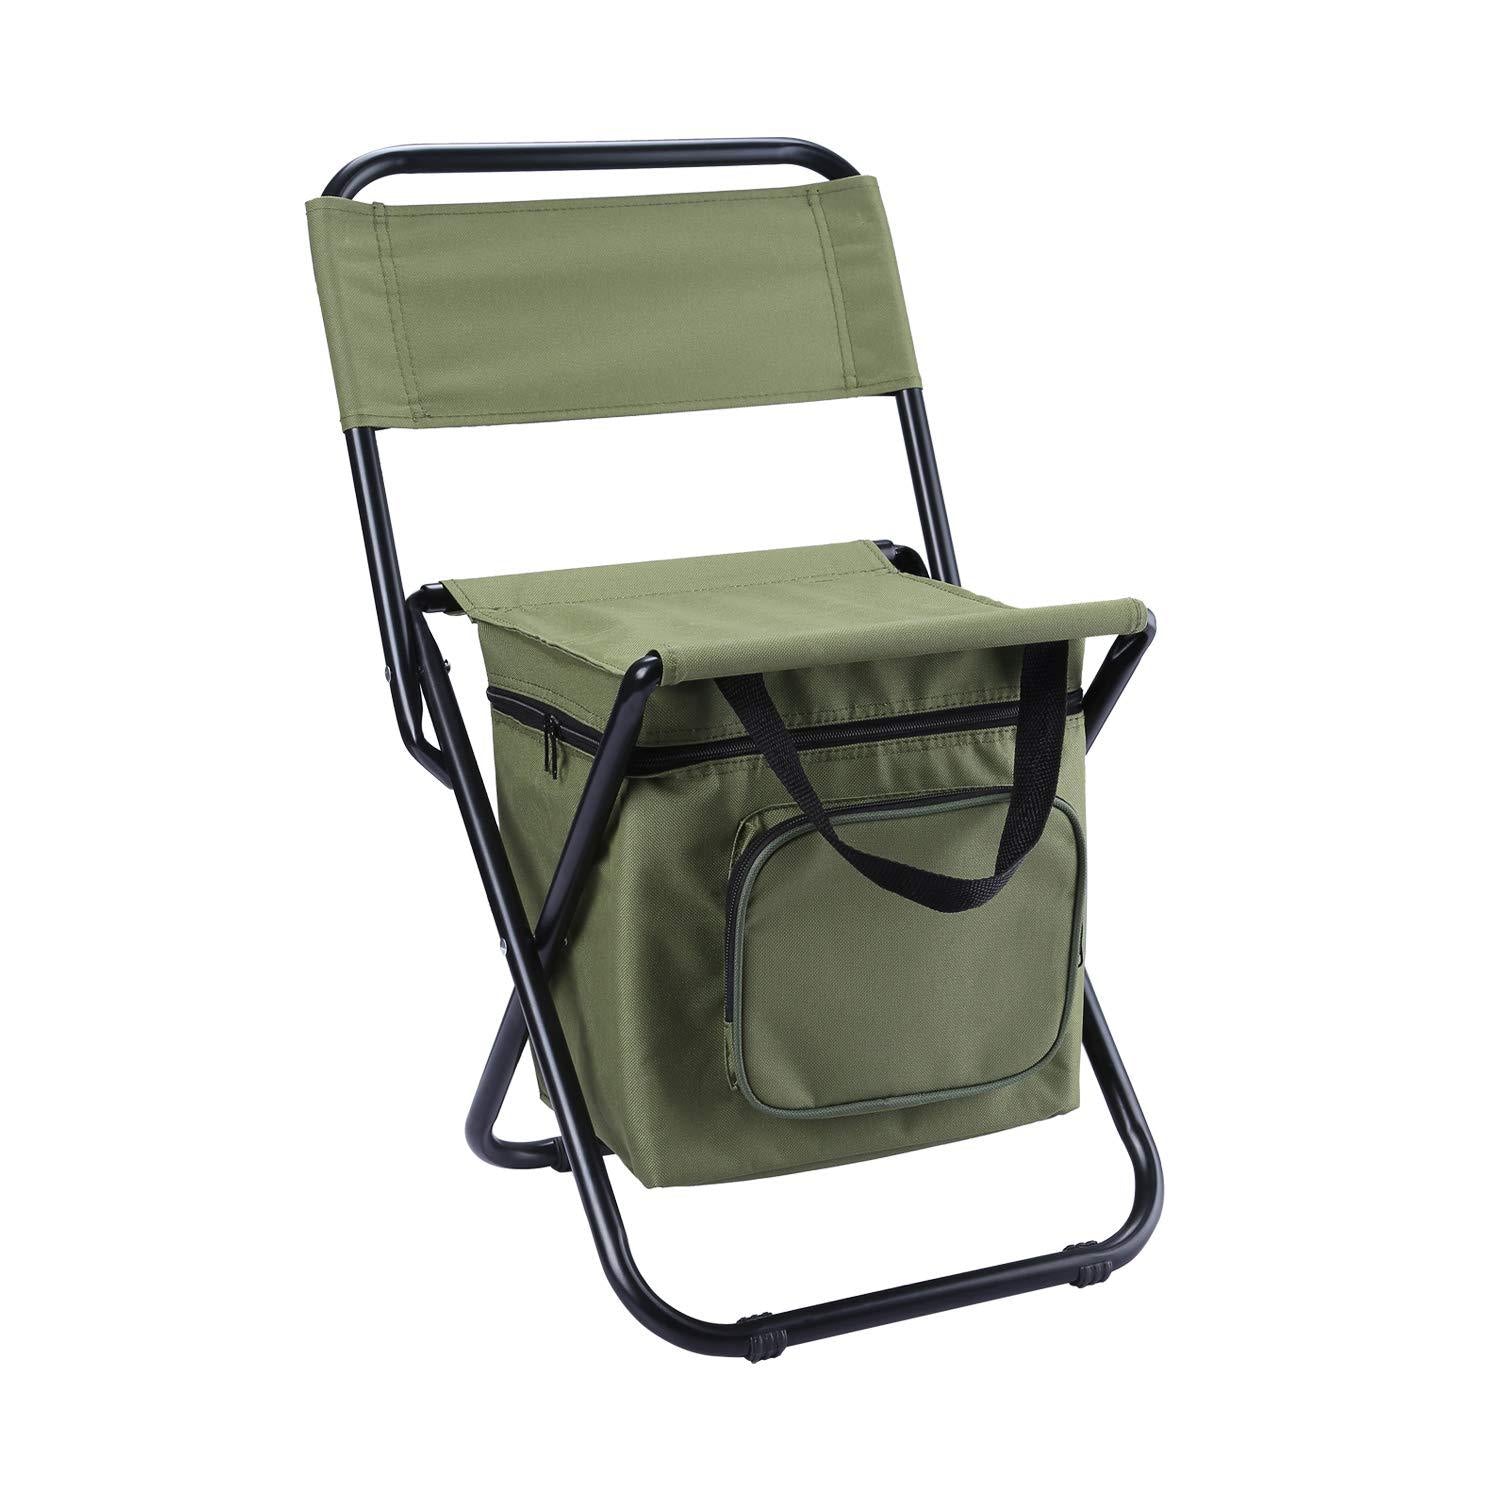 Folding Fishing Chair Backpack Insulation with Cooler Bag Portable Folding Beach Chair Seat Camping Chairs Folding Stool Chair